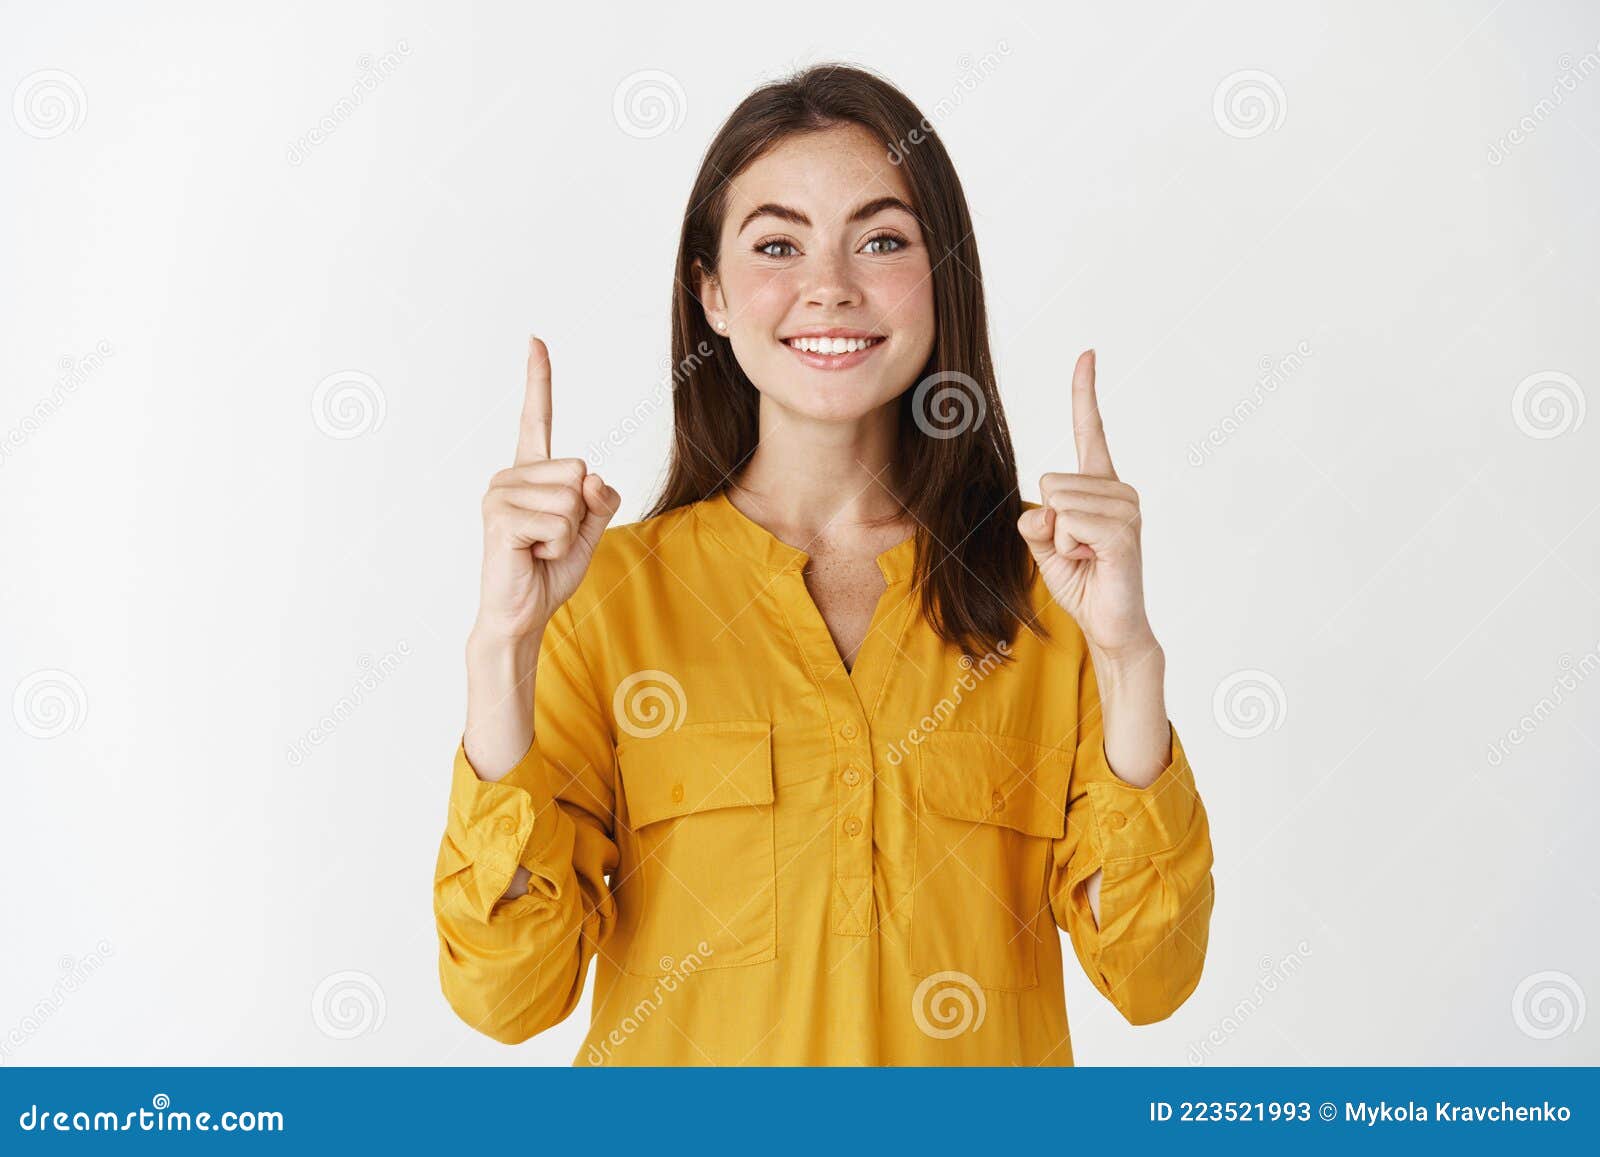 Image of Happy and Confident Woman Showing Her Choice, Pointing Fingers ...